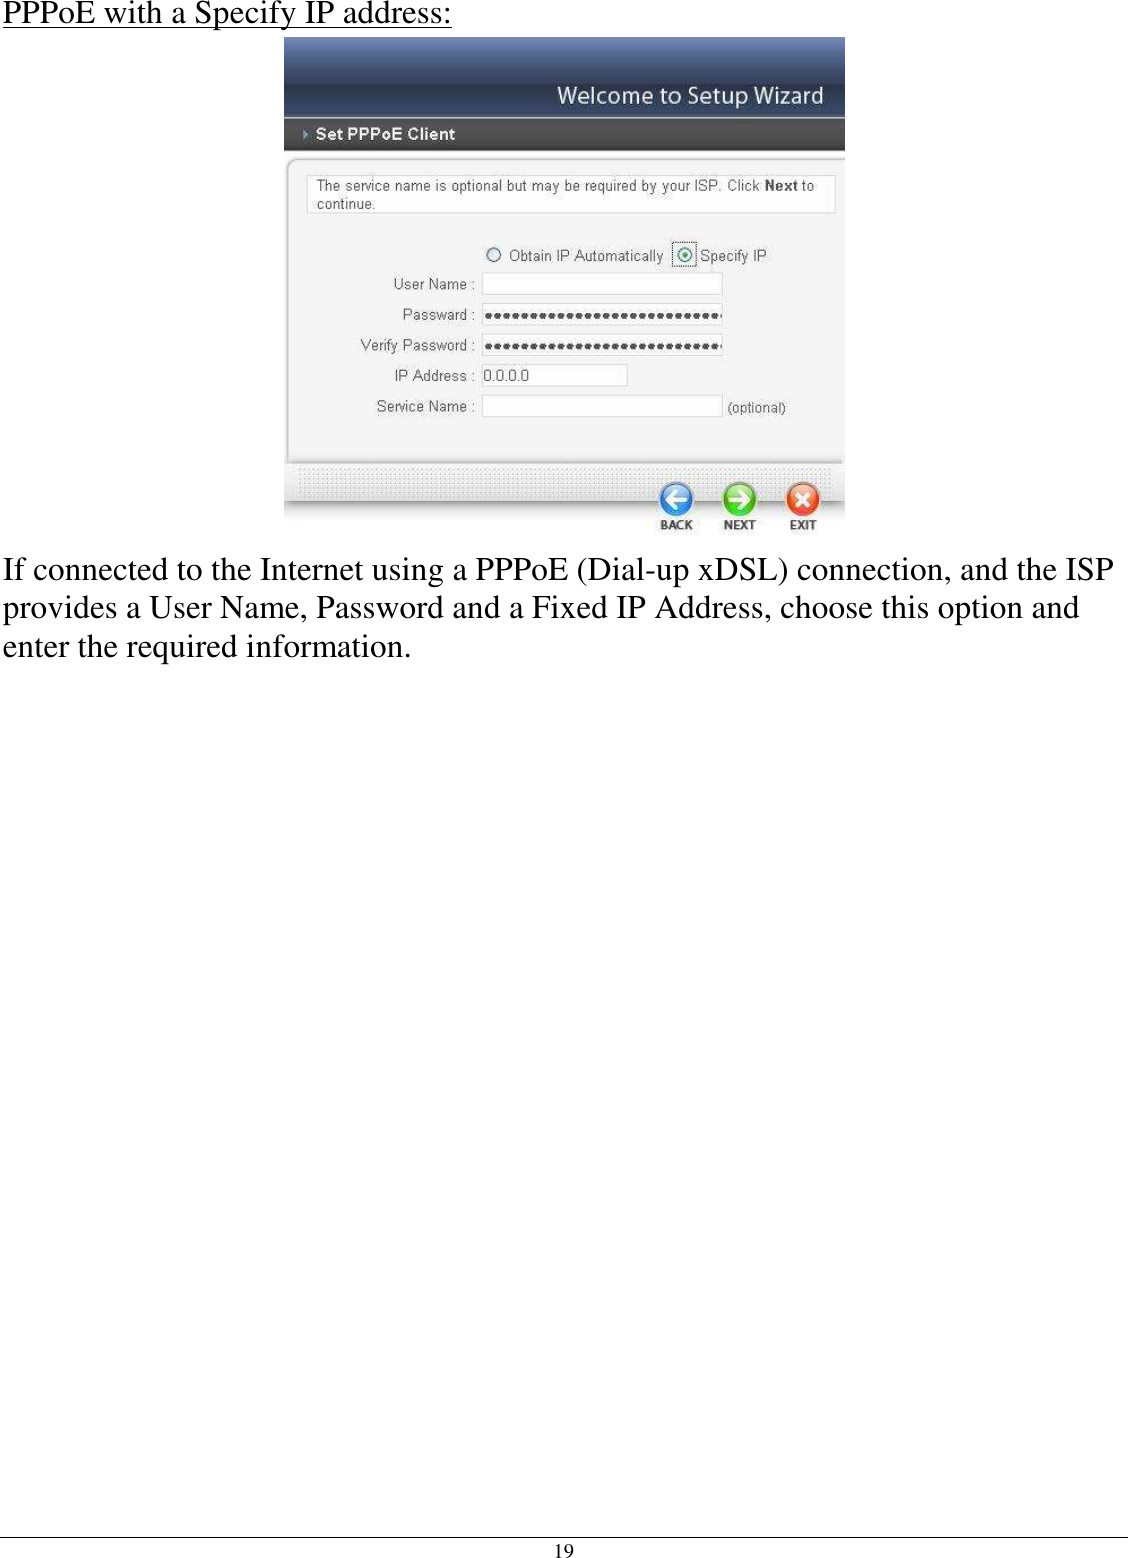 19 PPPoE with a Specify IP address:  If connected to the Internet using a PPPoE (Dial-up xDSL) connection, and the ISP provides a User Name, Password and a Fixed IP Address, choose this option and enter the required information.  